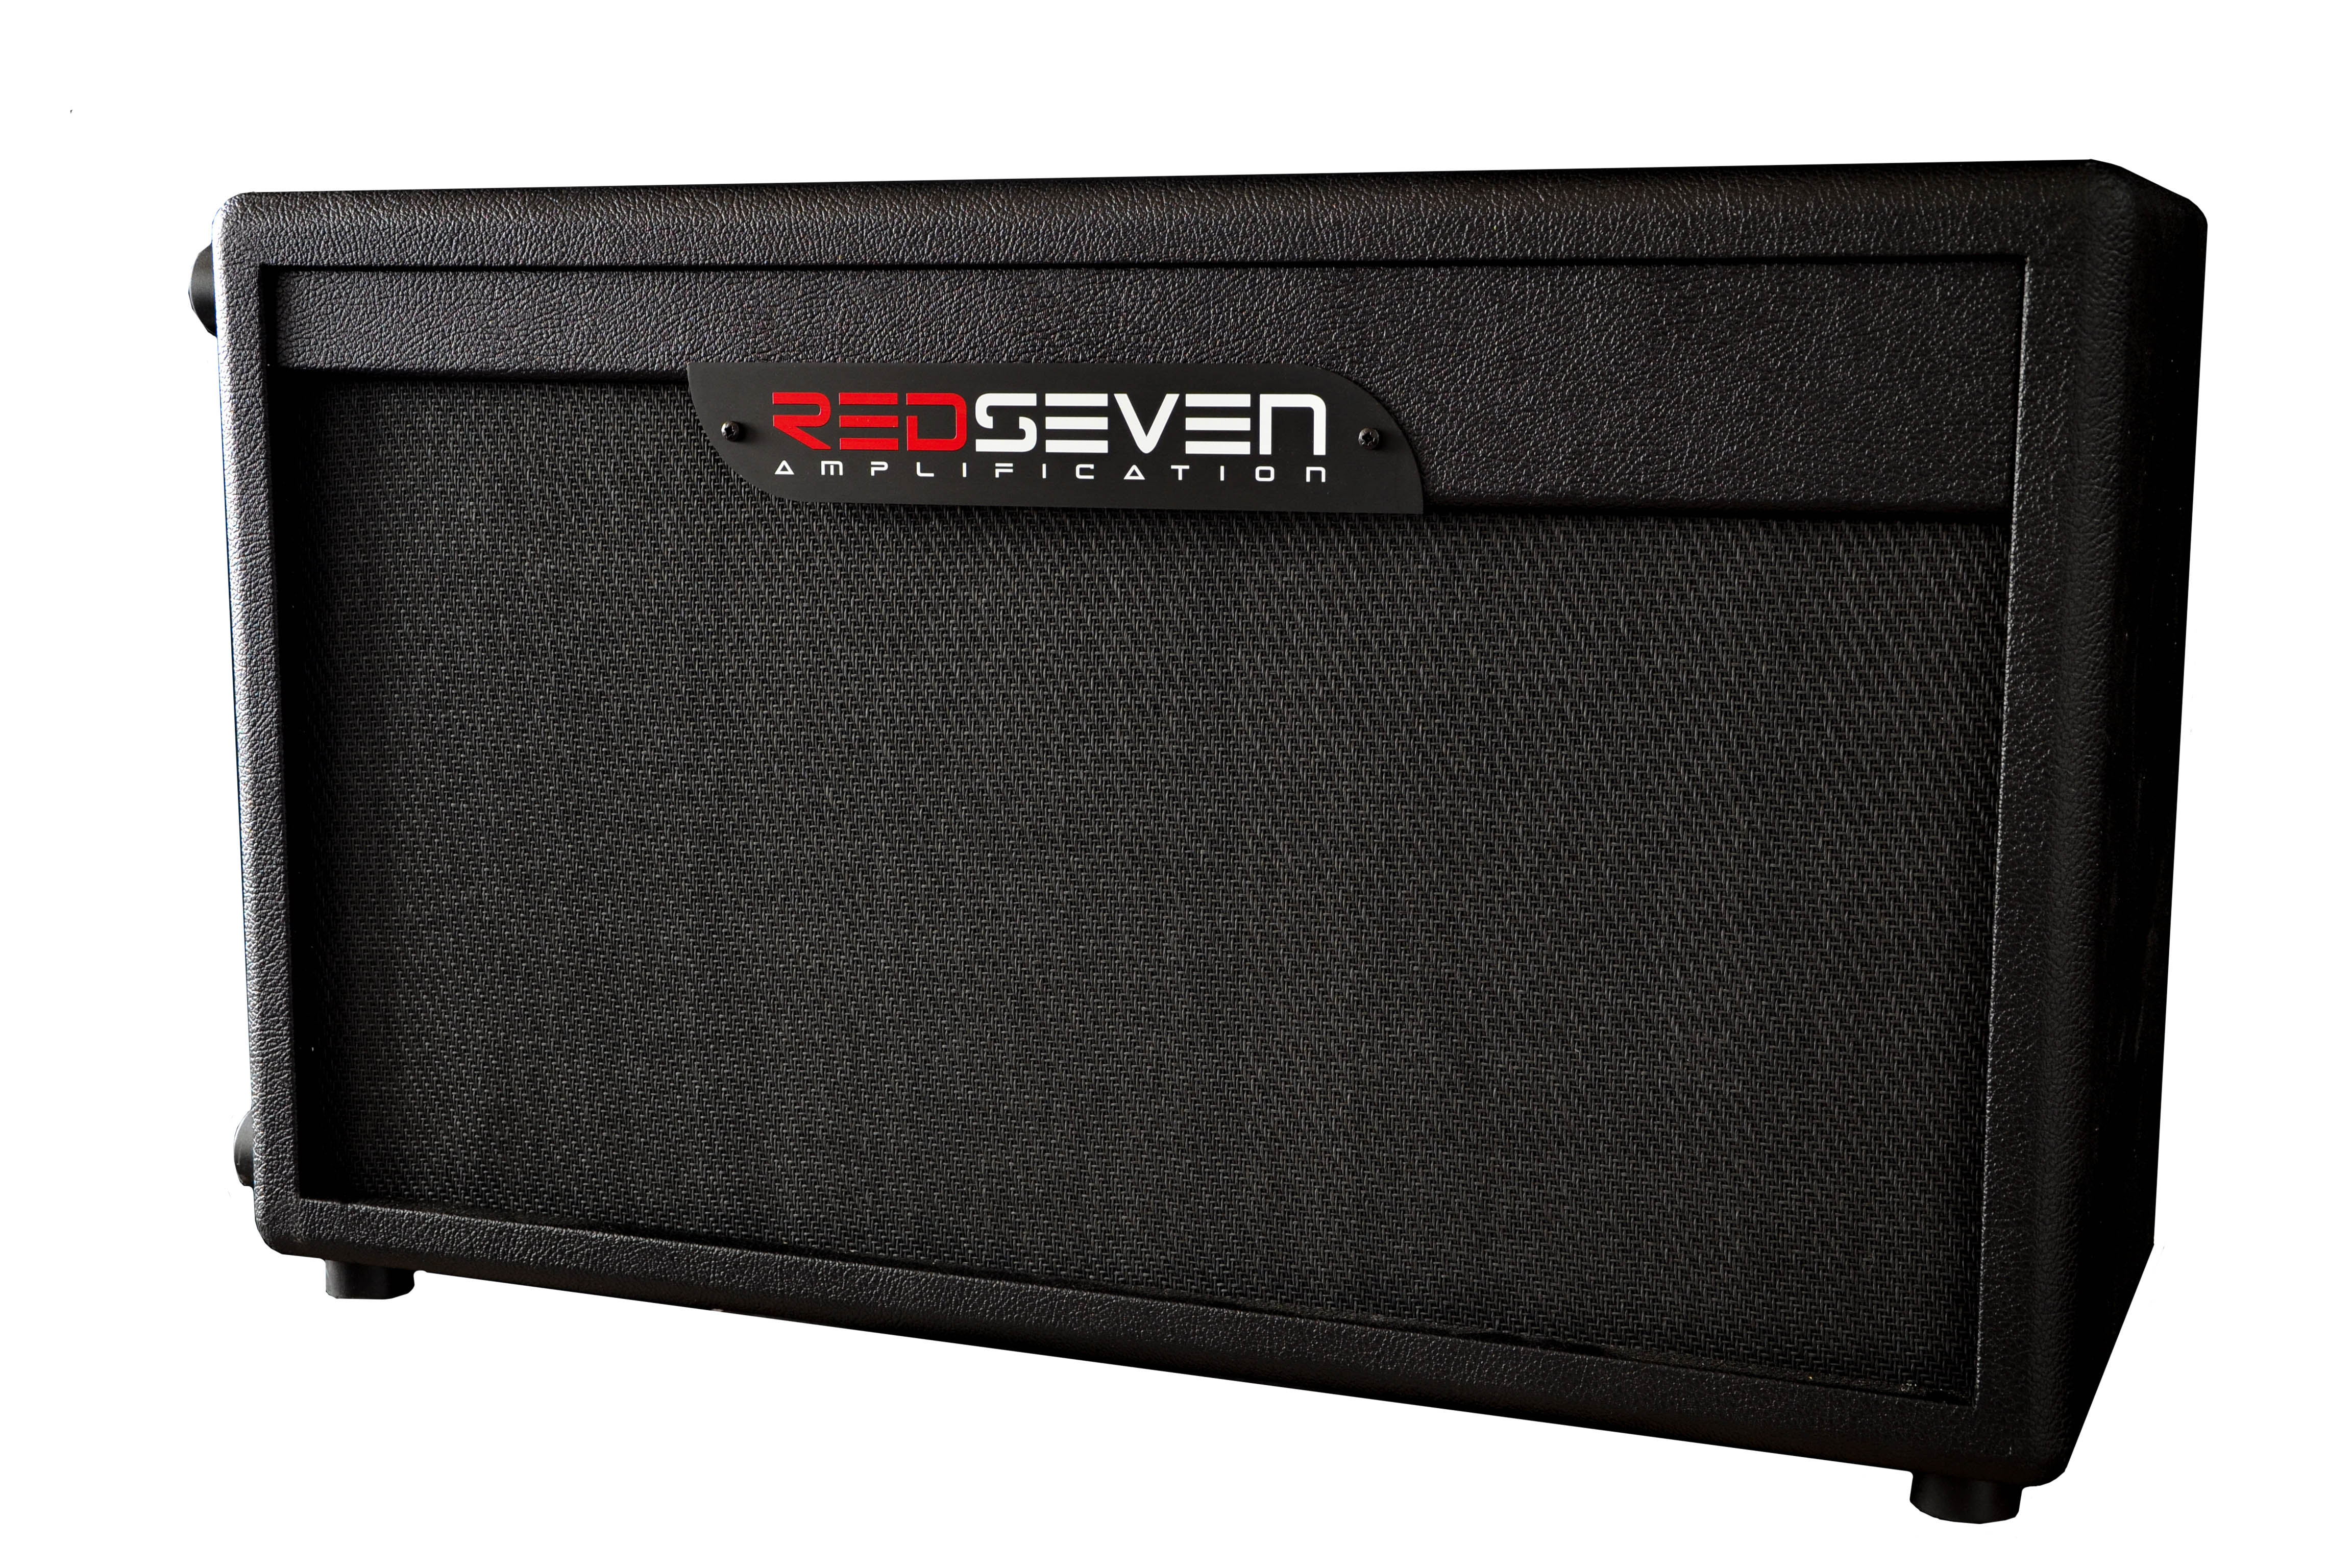 Redseven Amplification 2x12 Pro Cab Amp For Sale Red Seven